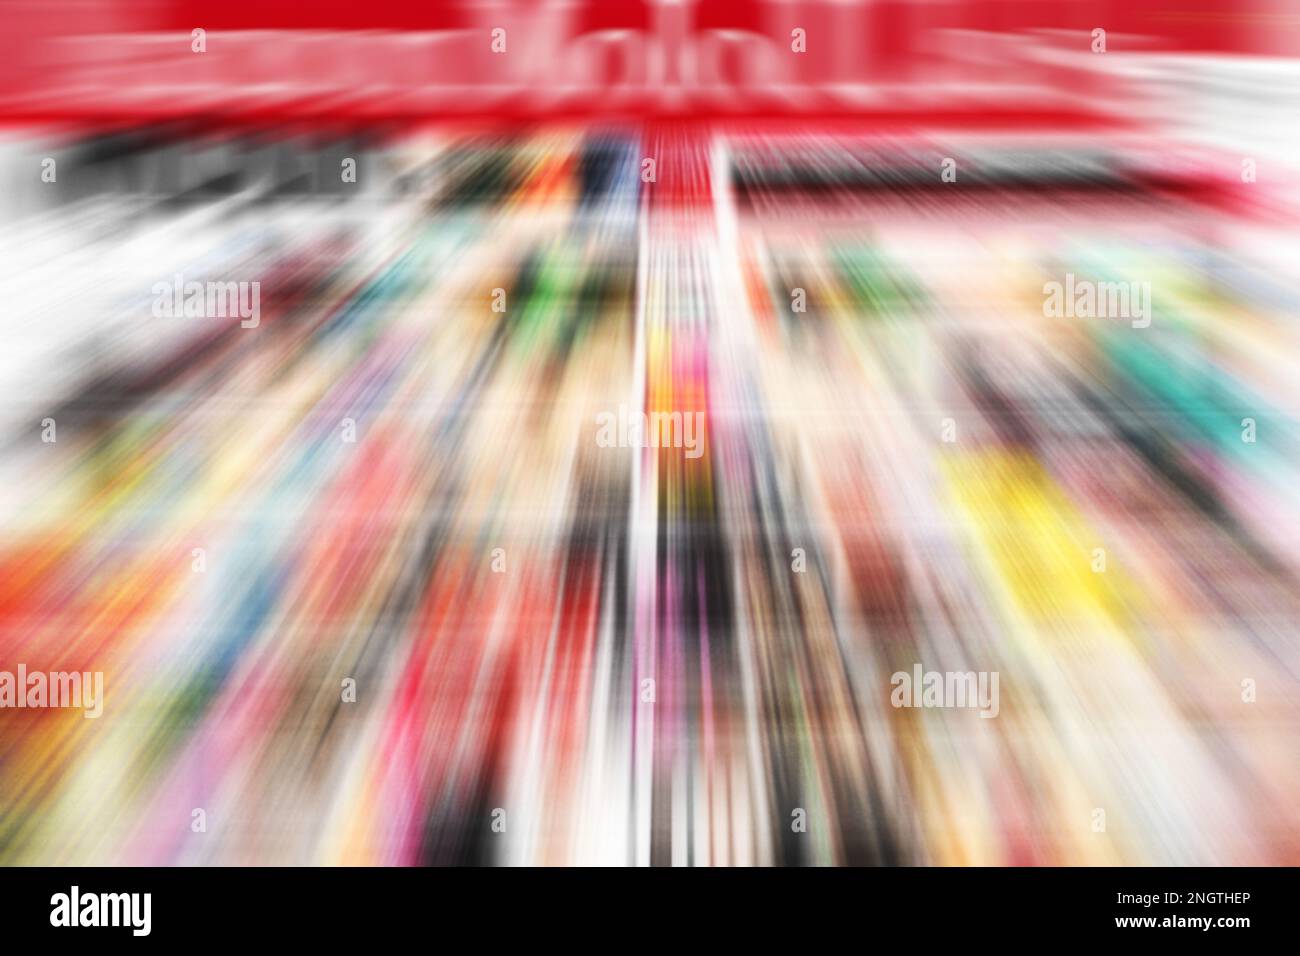 mass of printed production, blurry motion Stock Photo